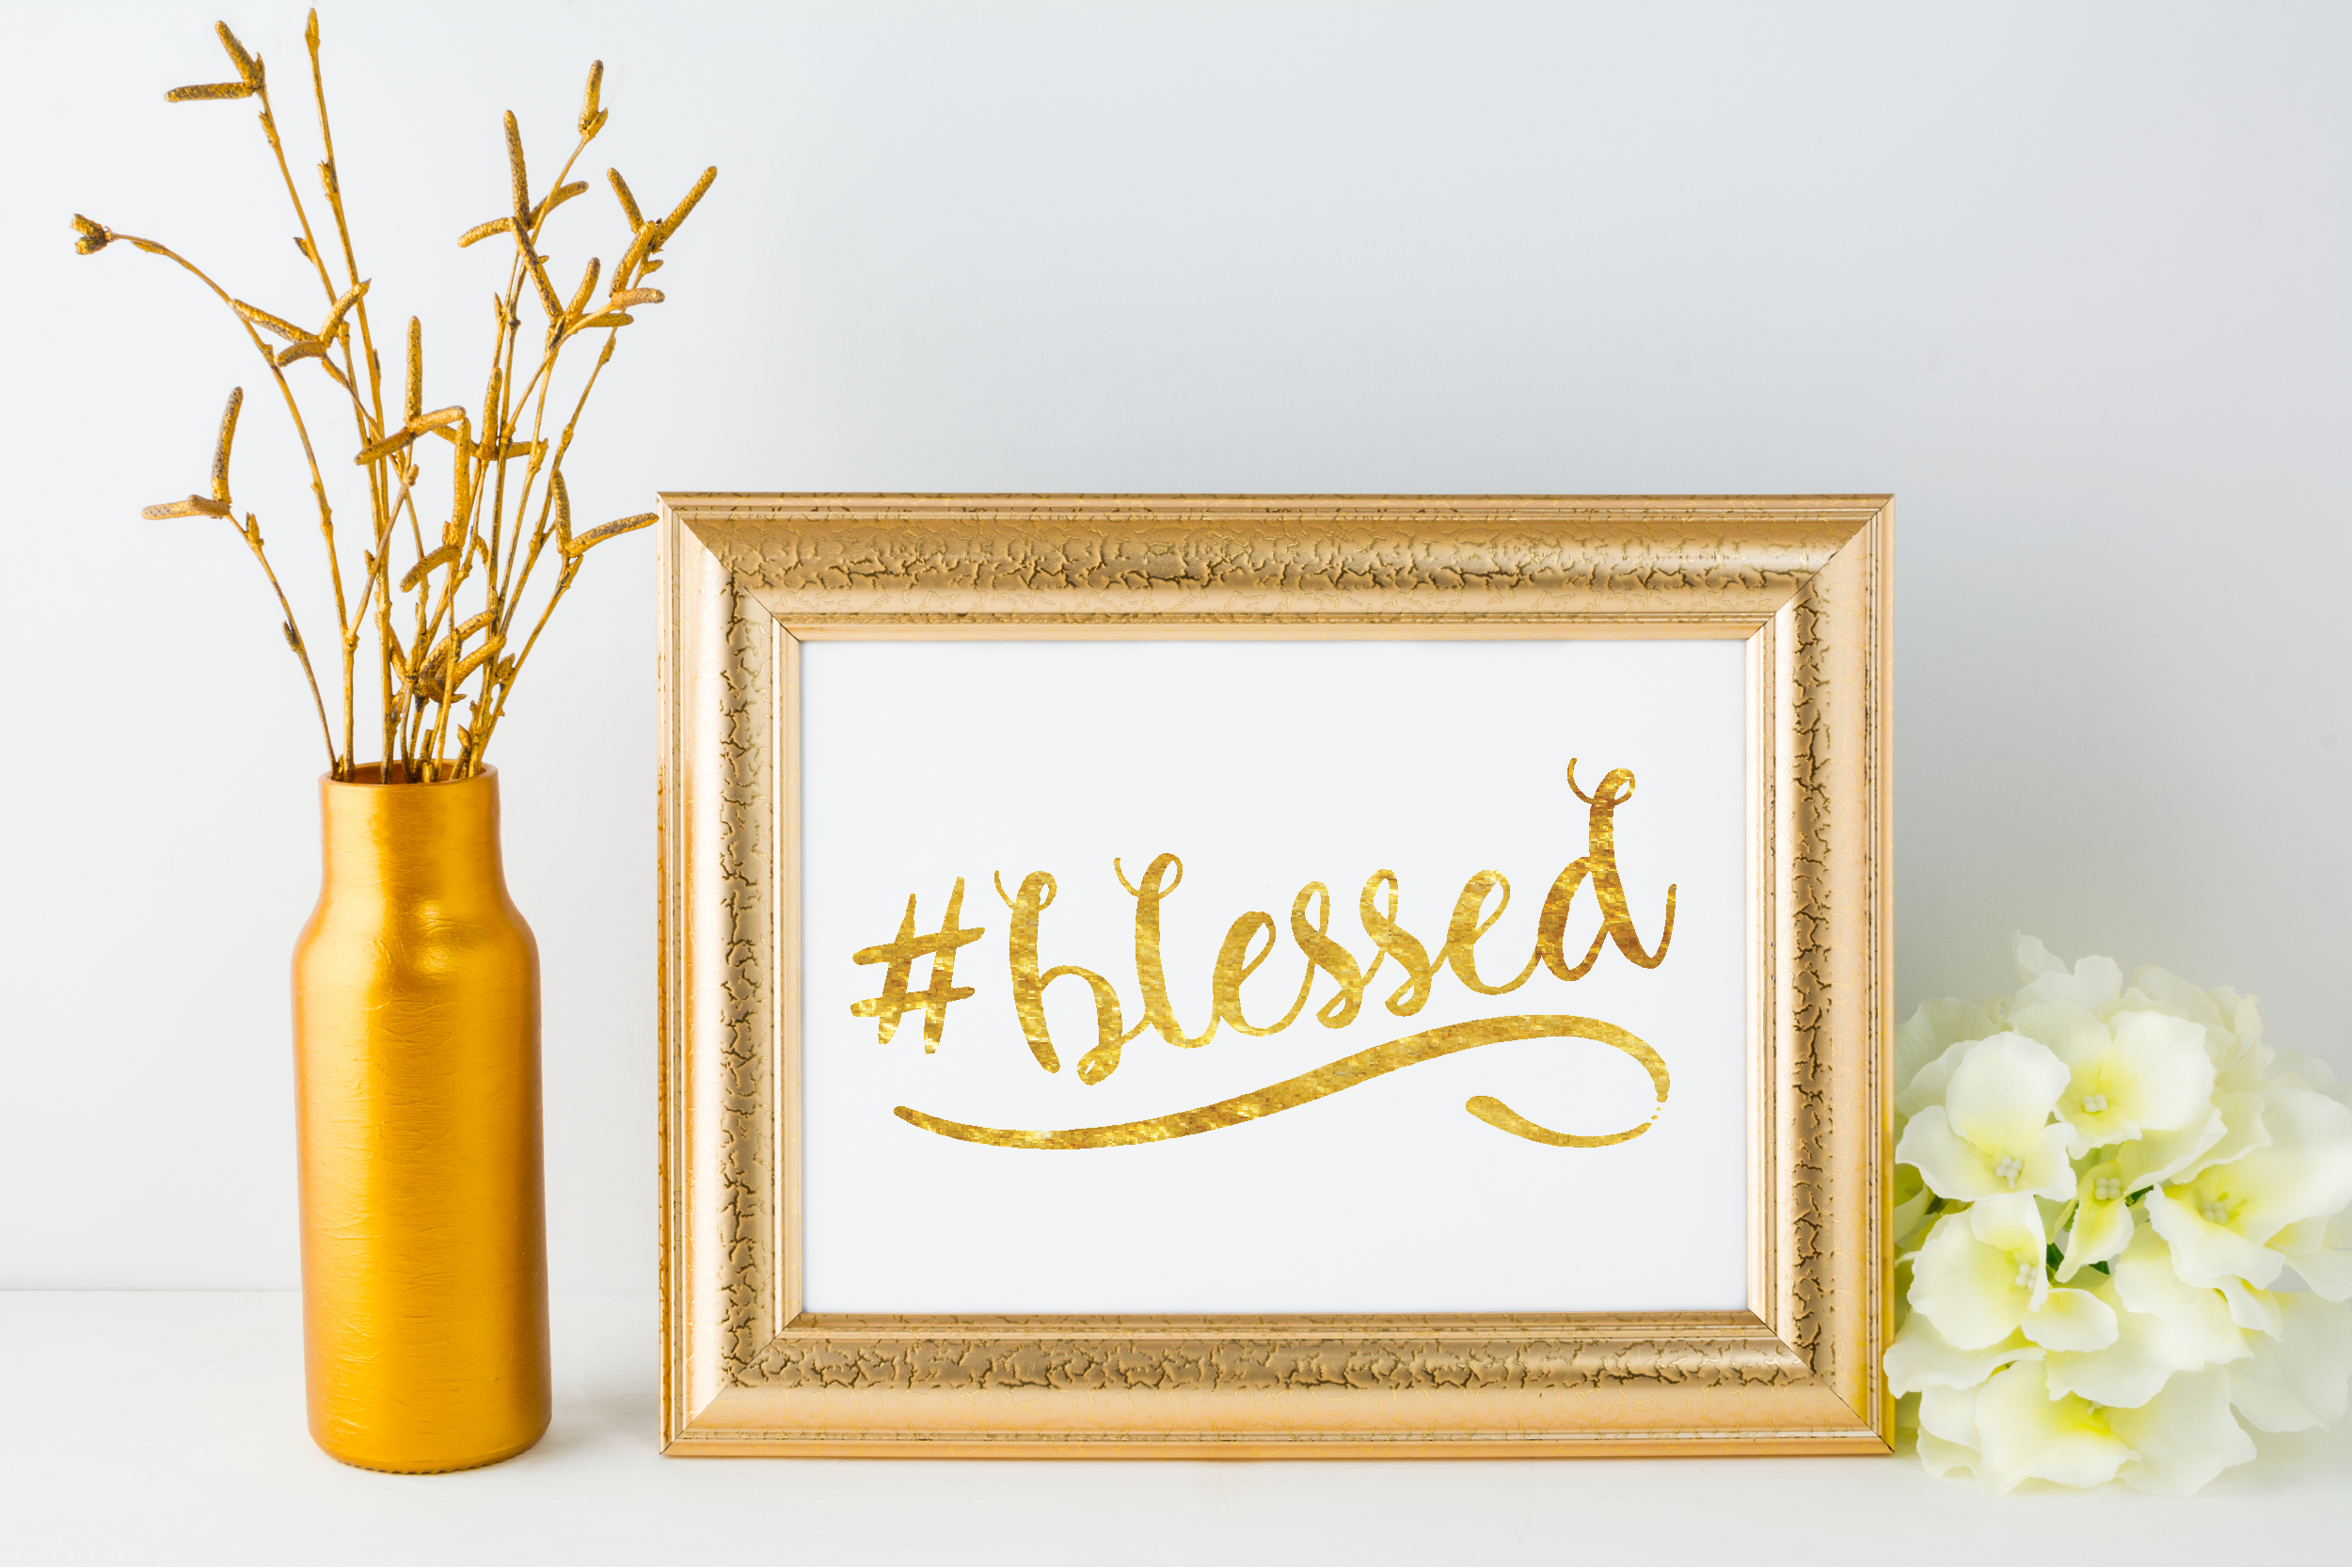 Free Printable hashtag Blessed in gold from @pinkimonogirl for a gallery wall